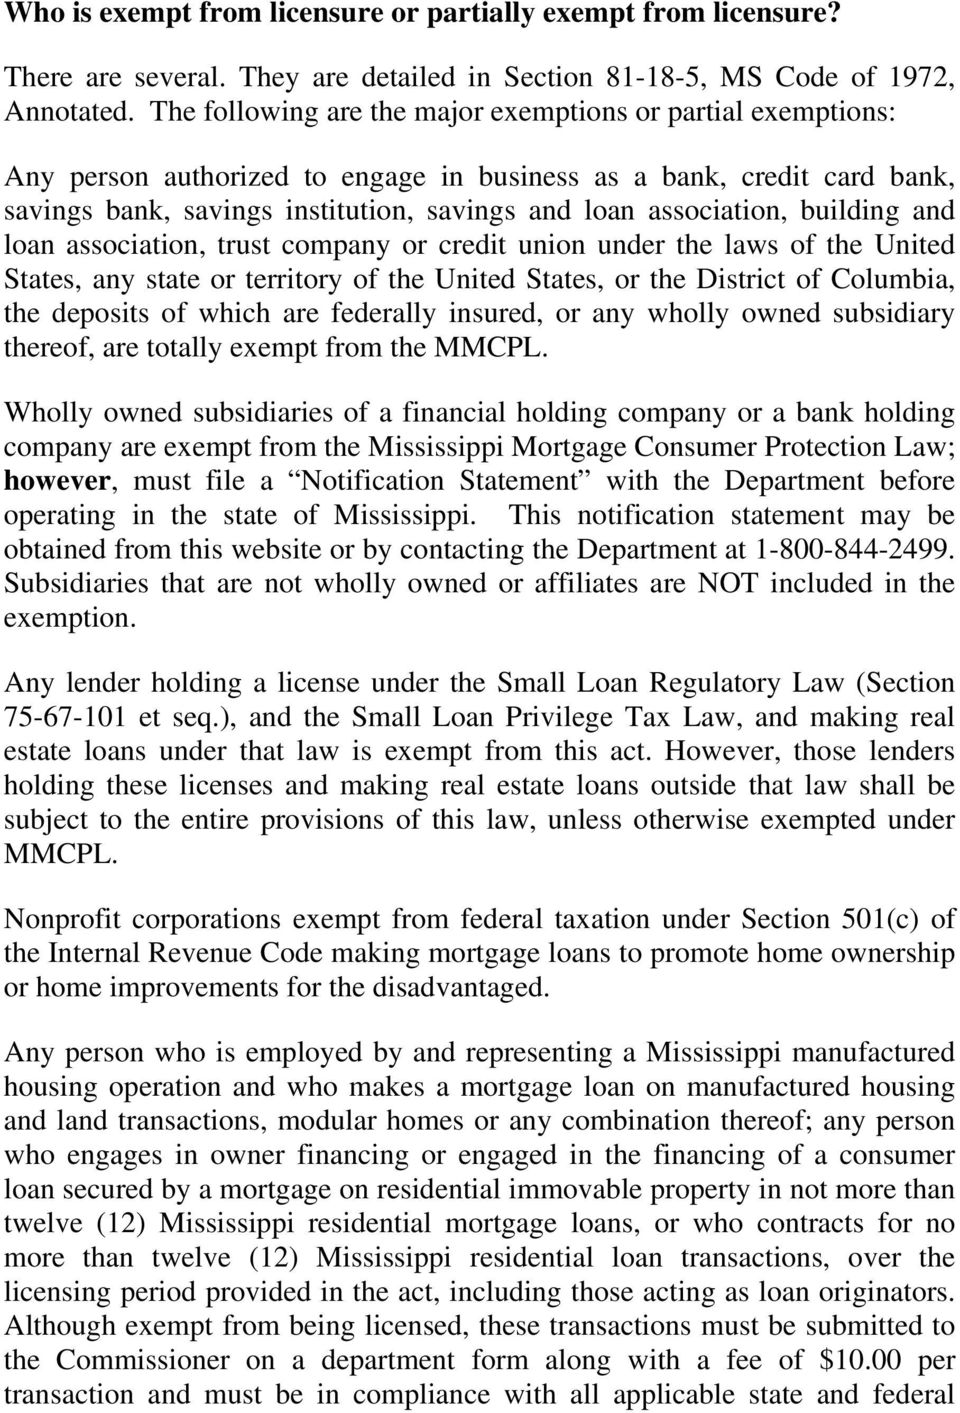 building and loan association, trust company or credit union under the laws of the United States, any state or territory of the United States, or the District of Columbia, the deposits of which are